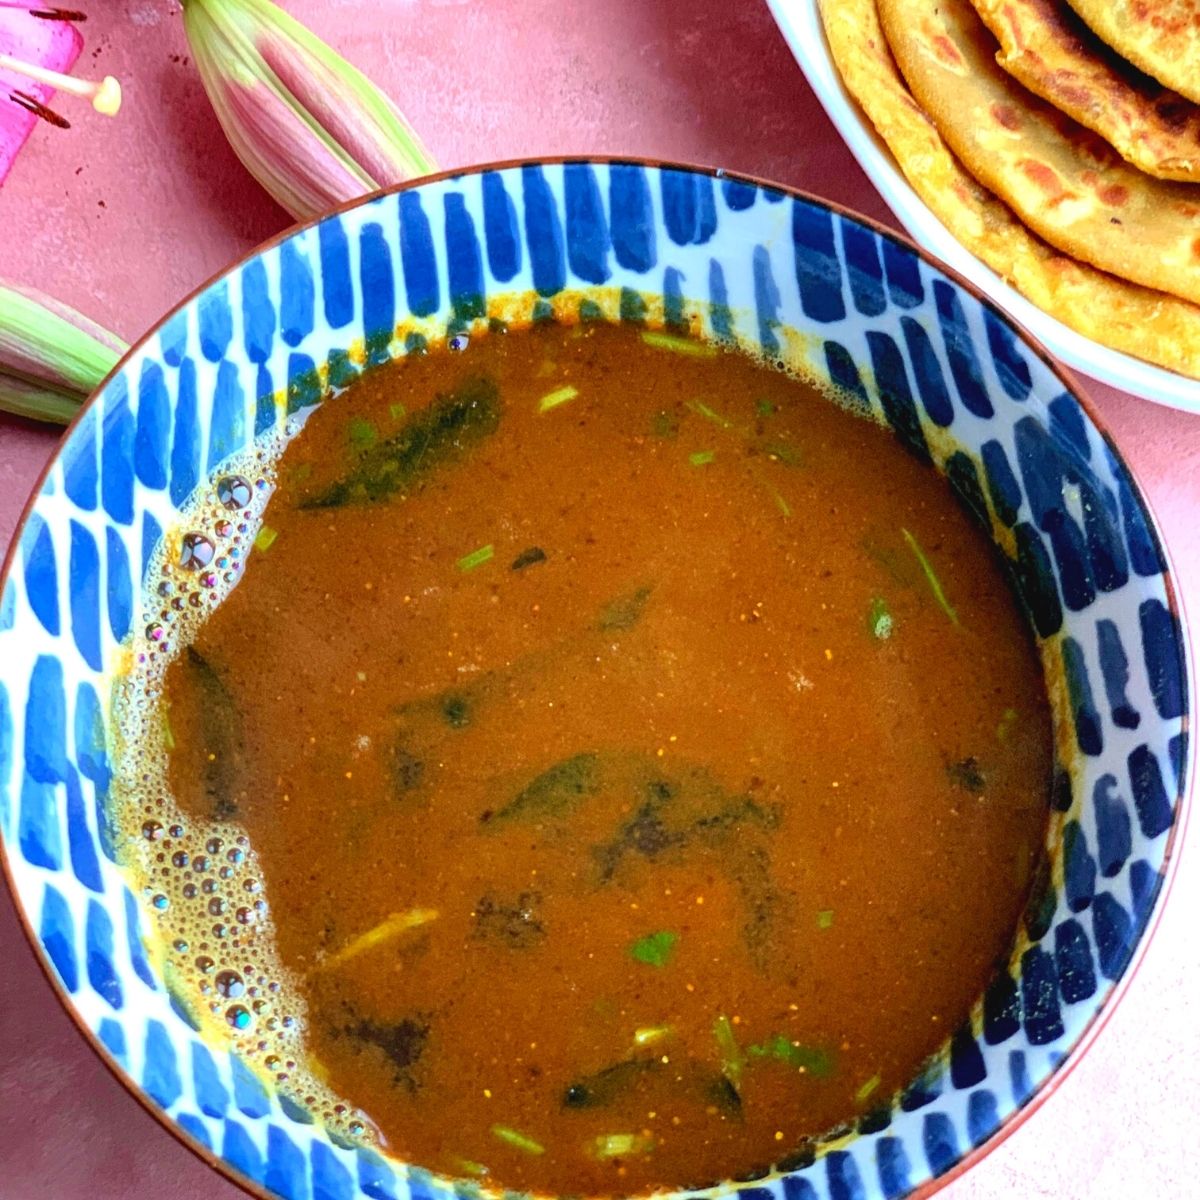 Katachi Amti is a traditional Maharashtrian style thin, spicy, tangy and slightly sweet dal or curry made using the stock of Chana Dal.